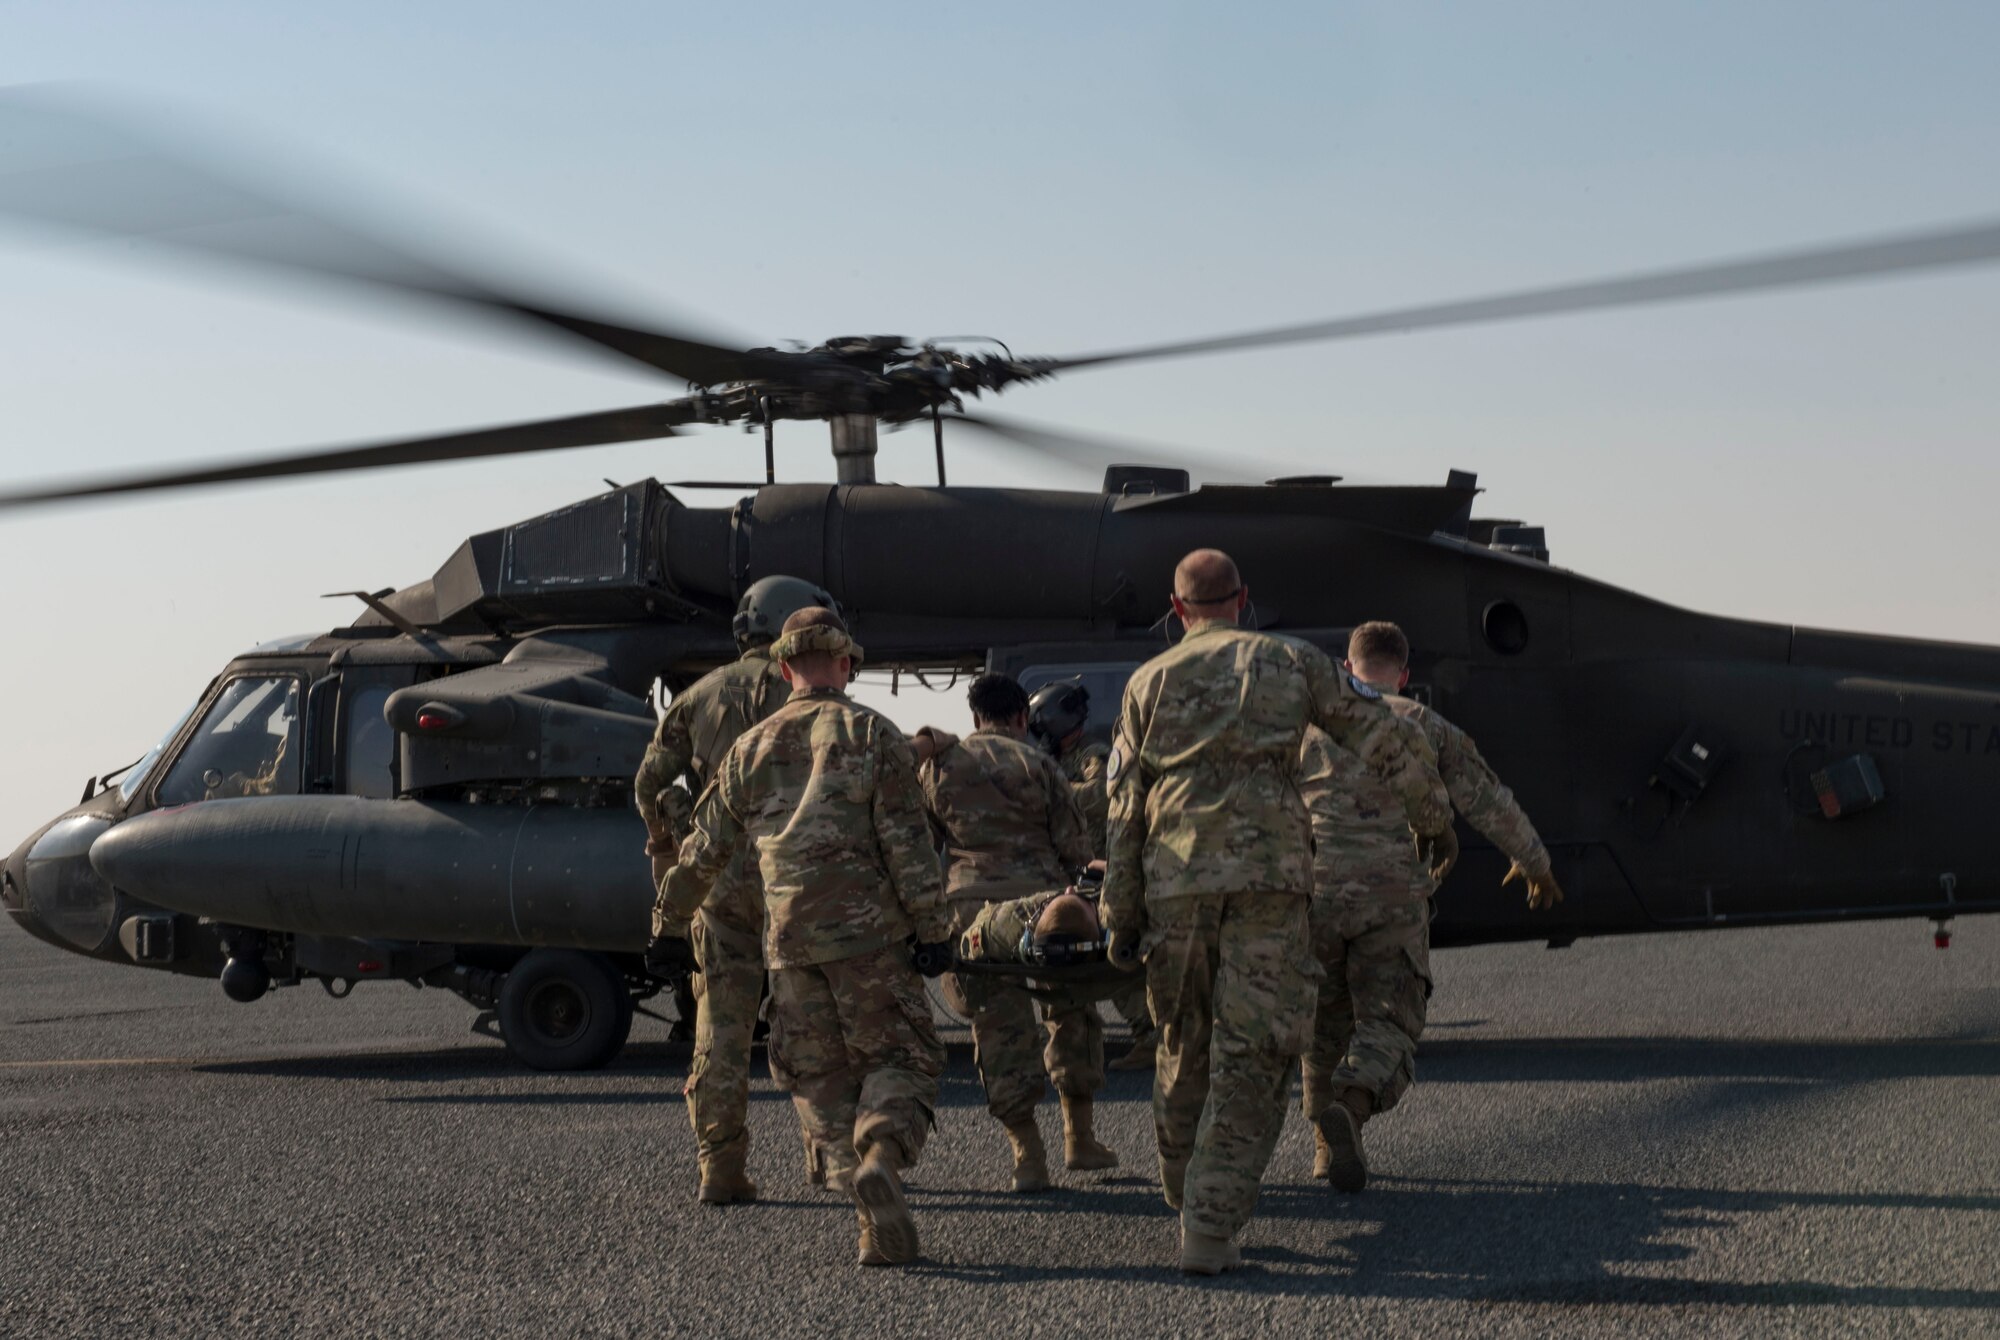 Members assigned to the 386th Expeditionary Medical Group carry a patient to a UH-60 Black Hawk helicopter during a medical evacuation training exercise at Ali Al Salem Air Base, Kuwait, Oct. 27, 2020.